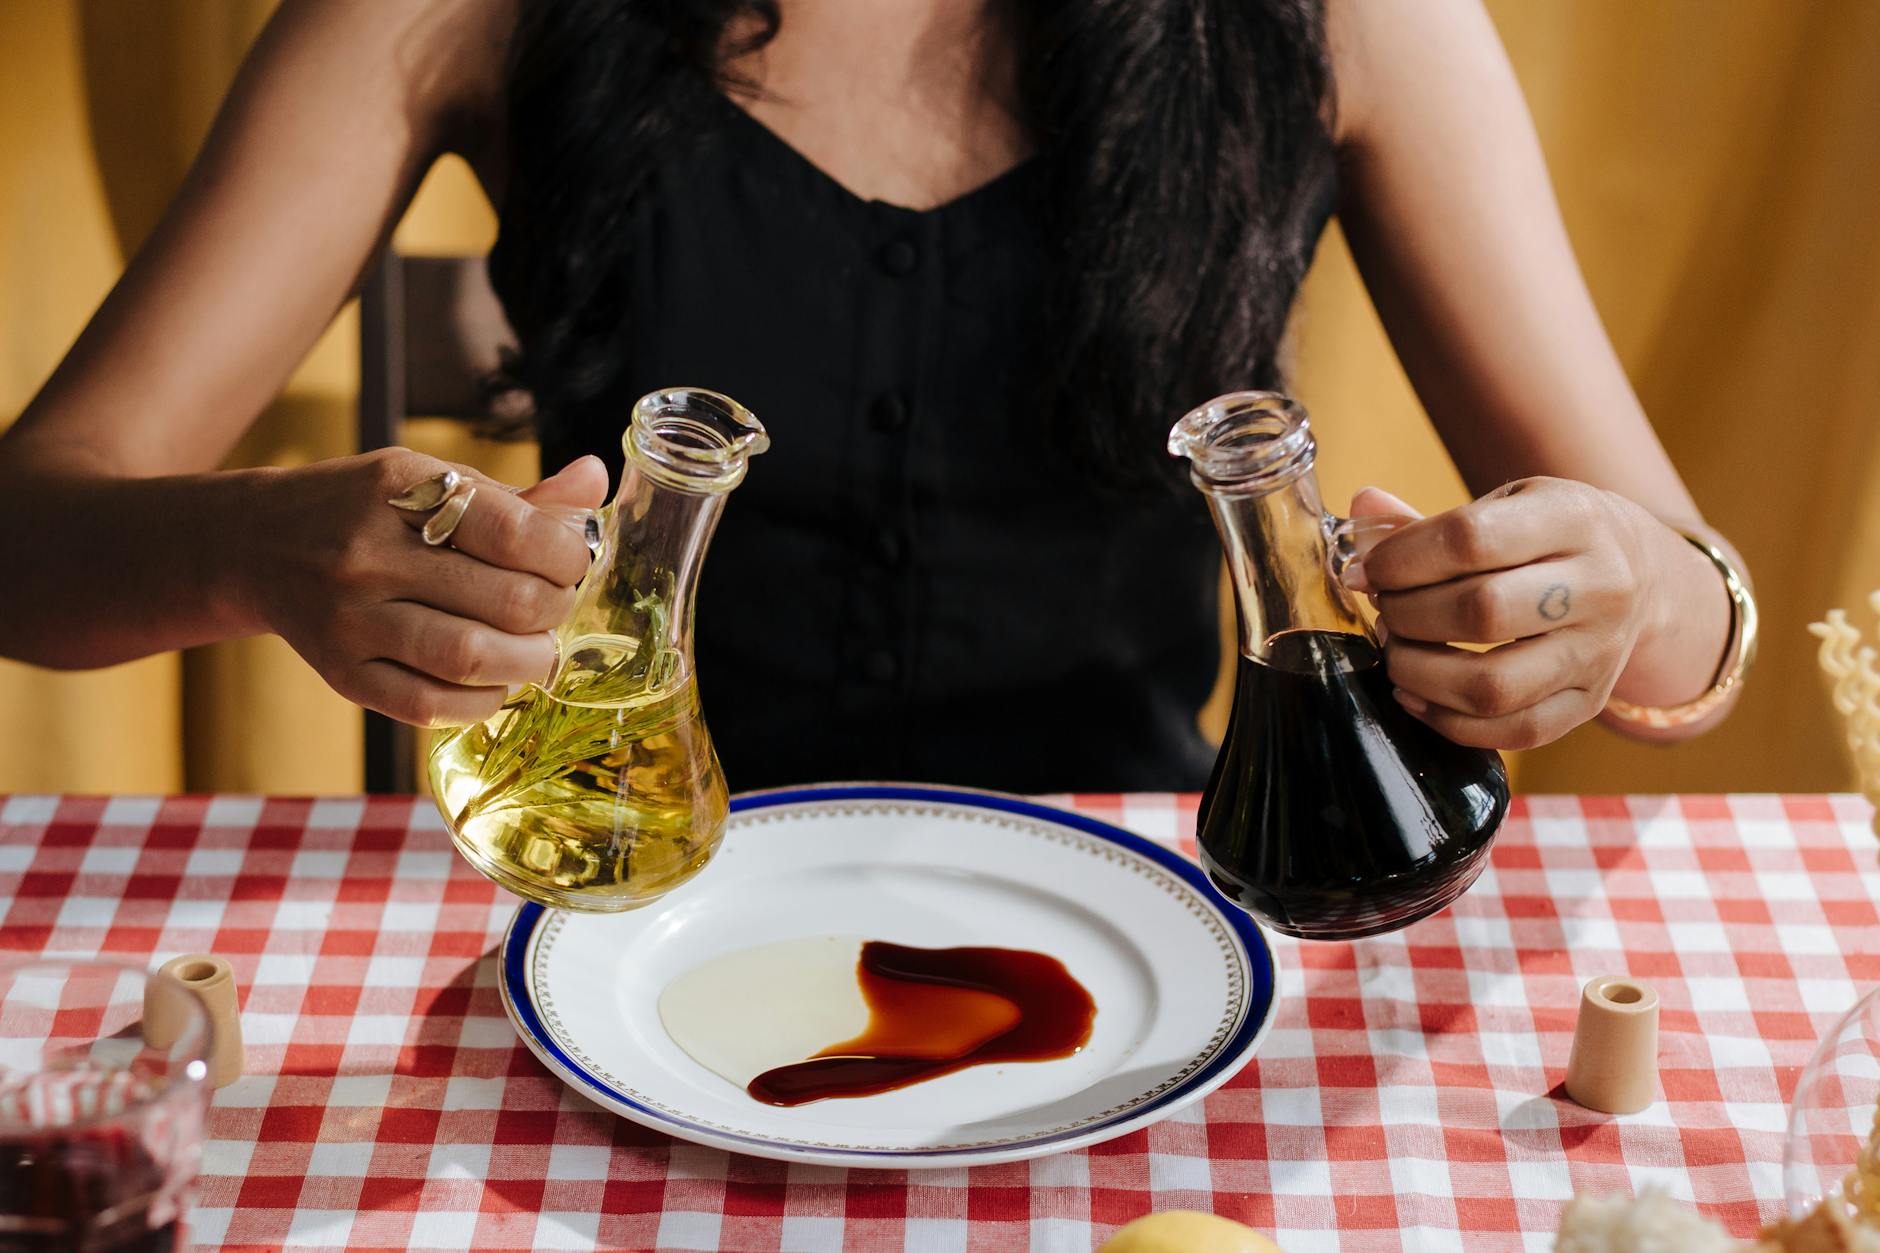 woman with olive oil and vinegar bottles in hands